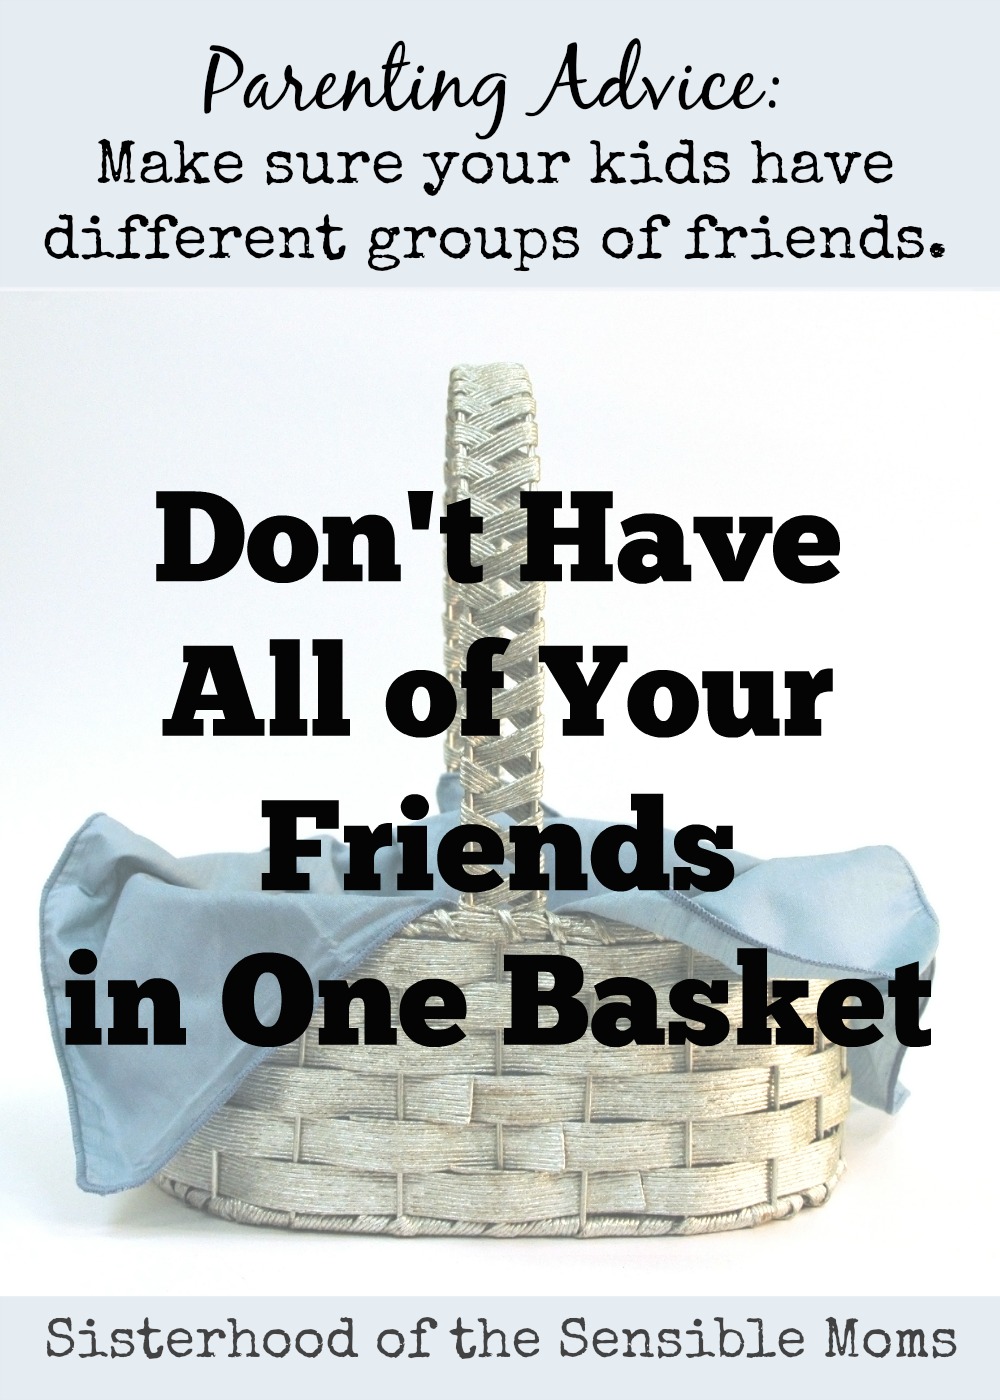 "Don't Have All of Your Friends in One Basket" Parenting Advice: Diversify your kids's groups of friends. Sisterhood of the Sensible Moms